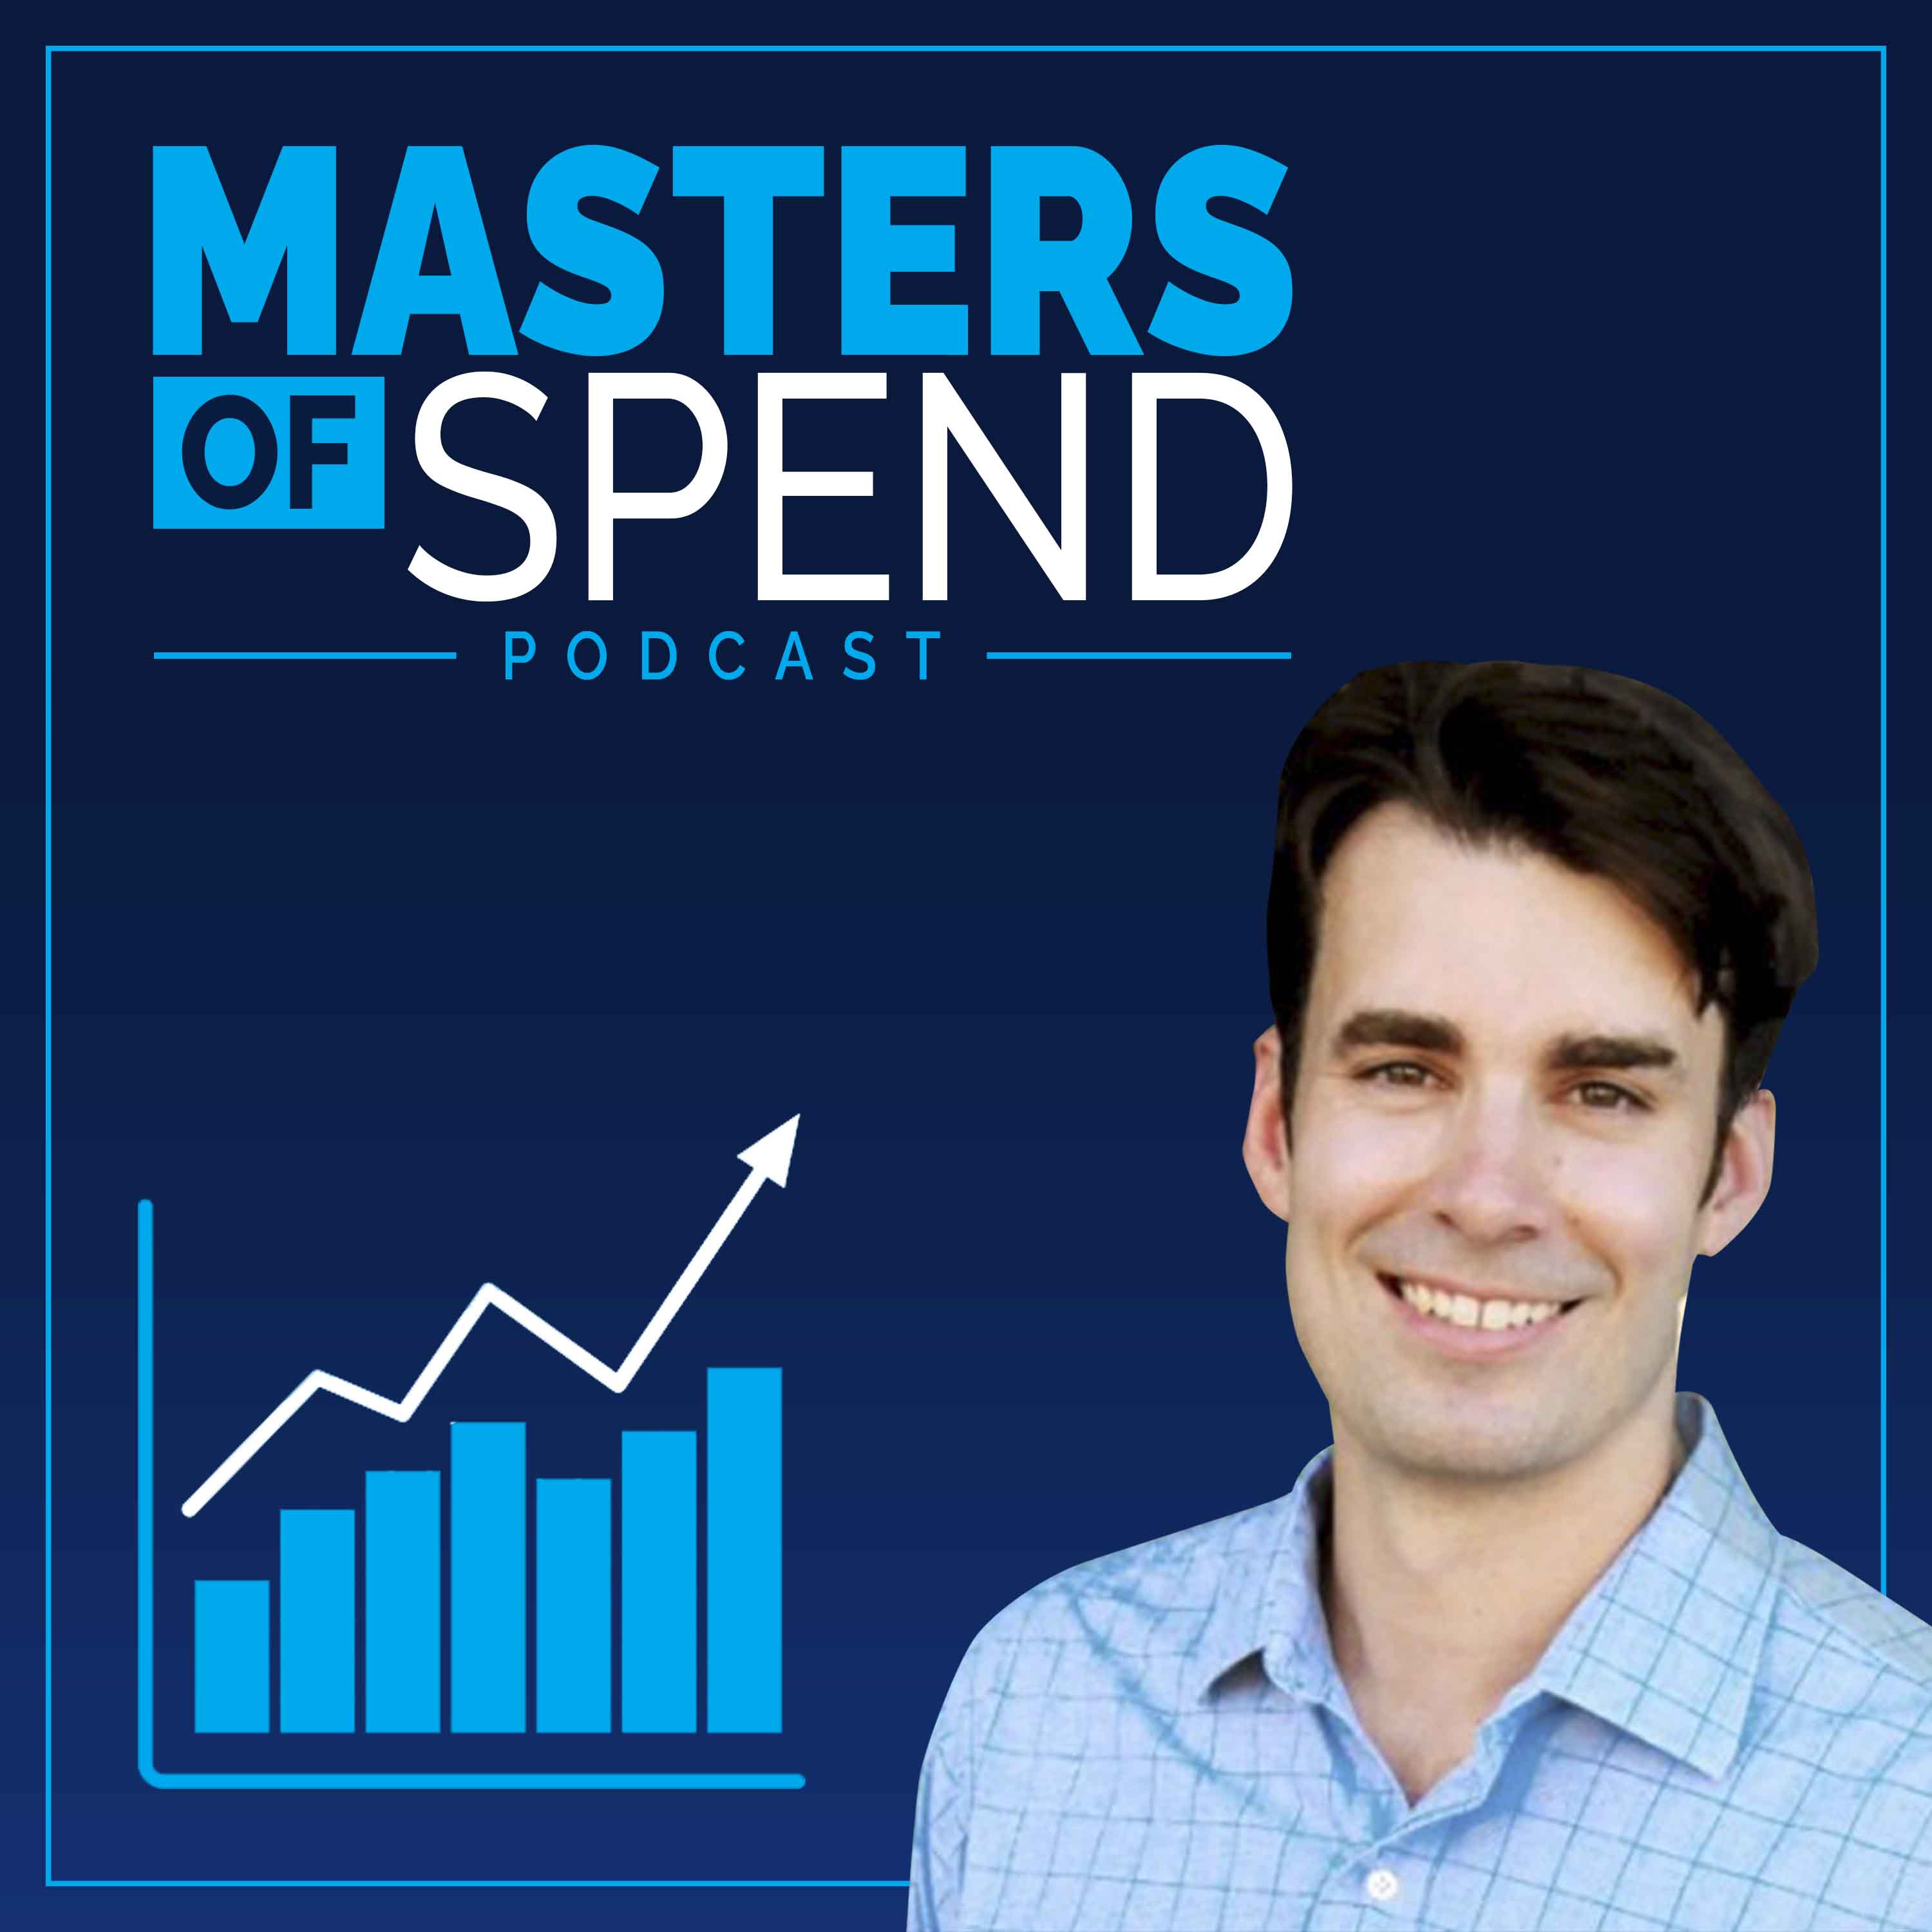 Artwork for Masters of Spend